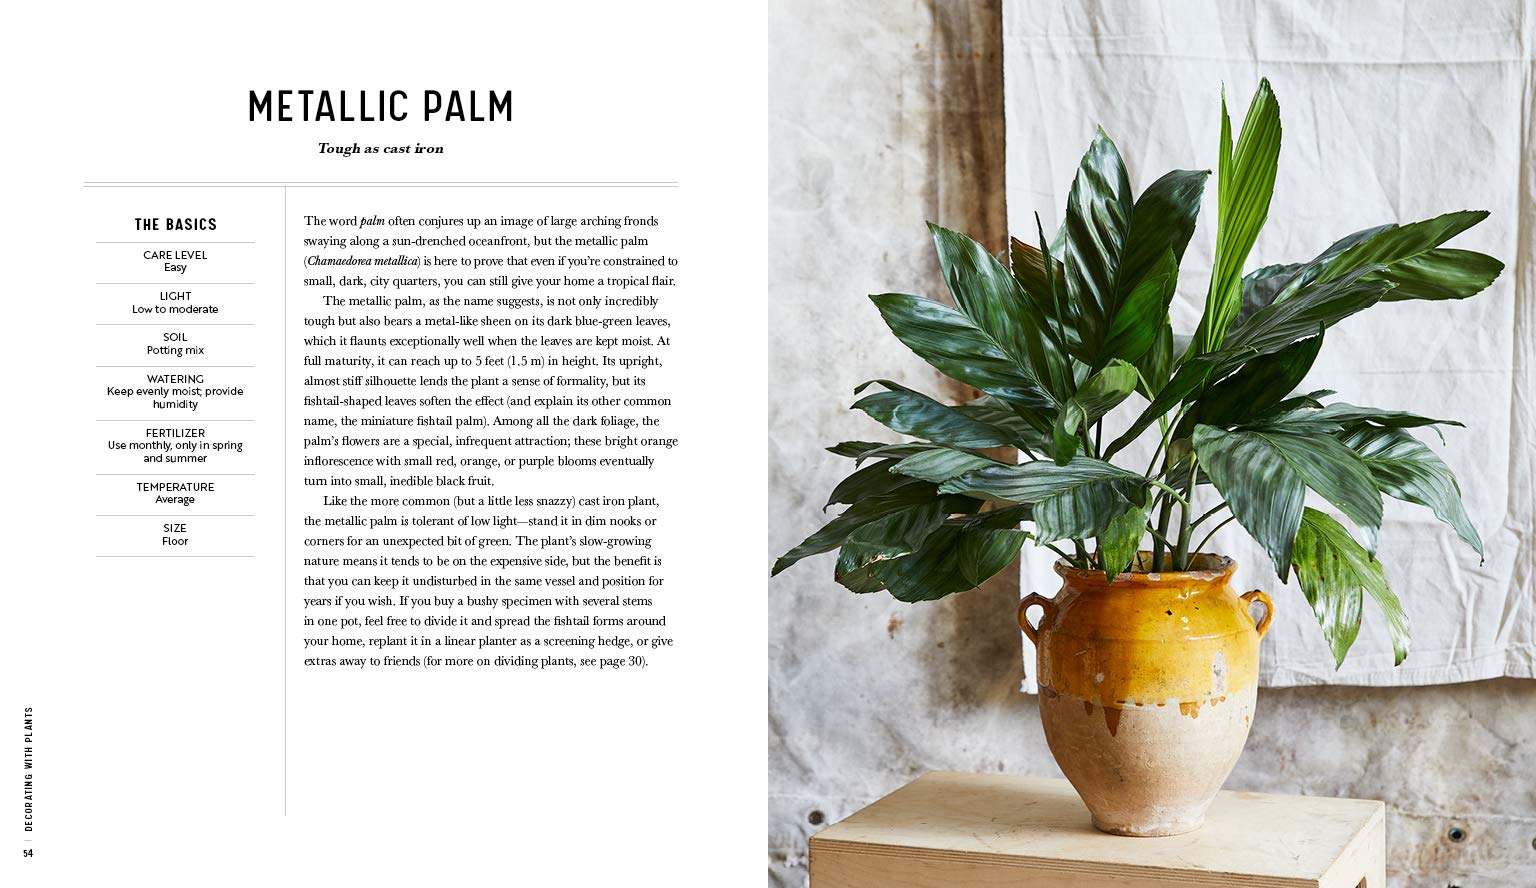 Decorating With Plants by Baylor Chapman